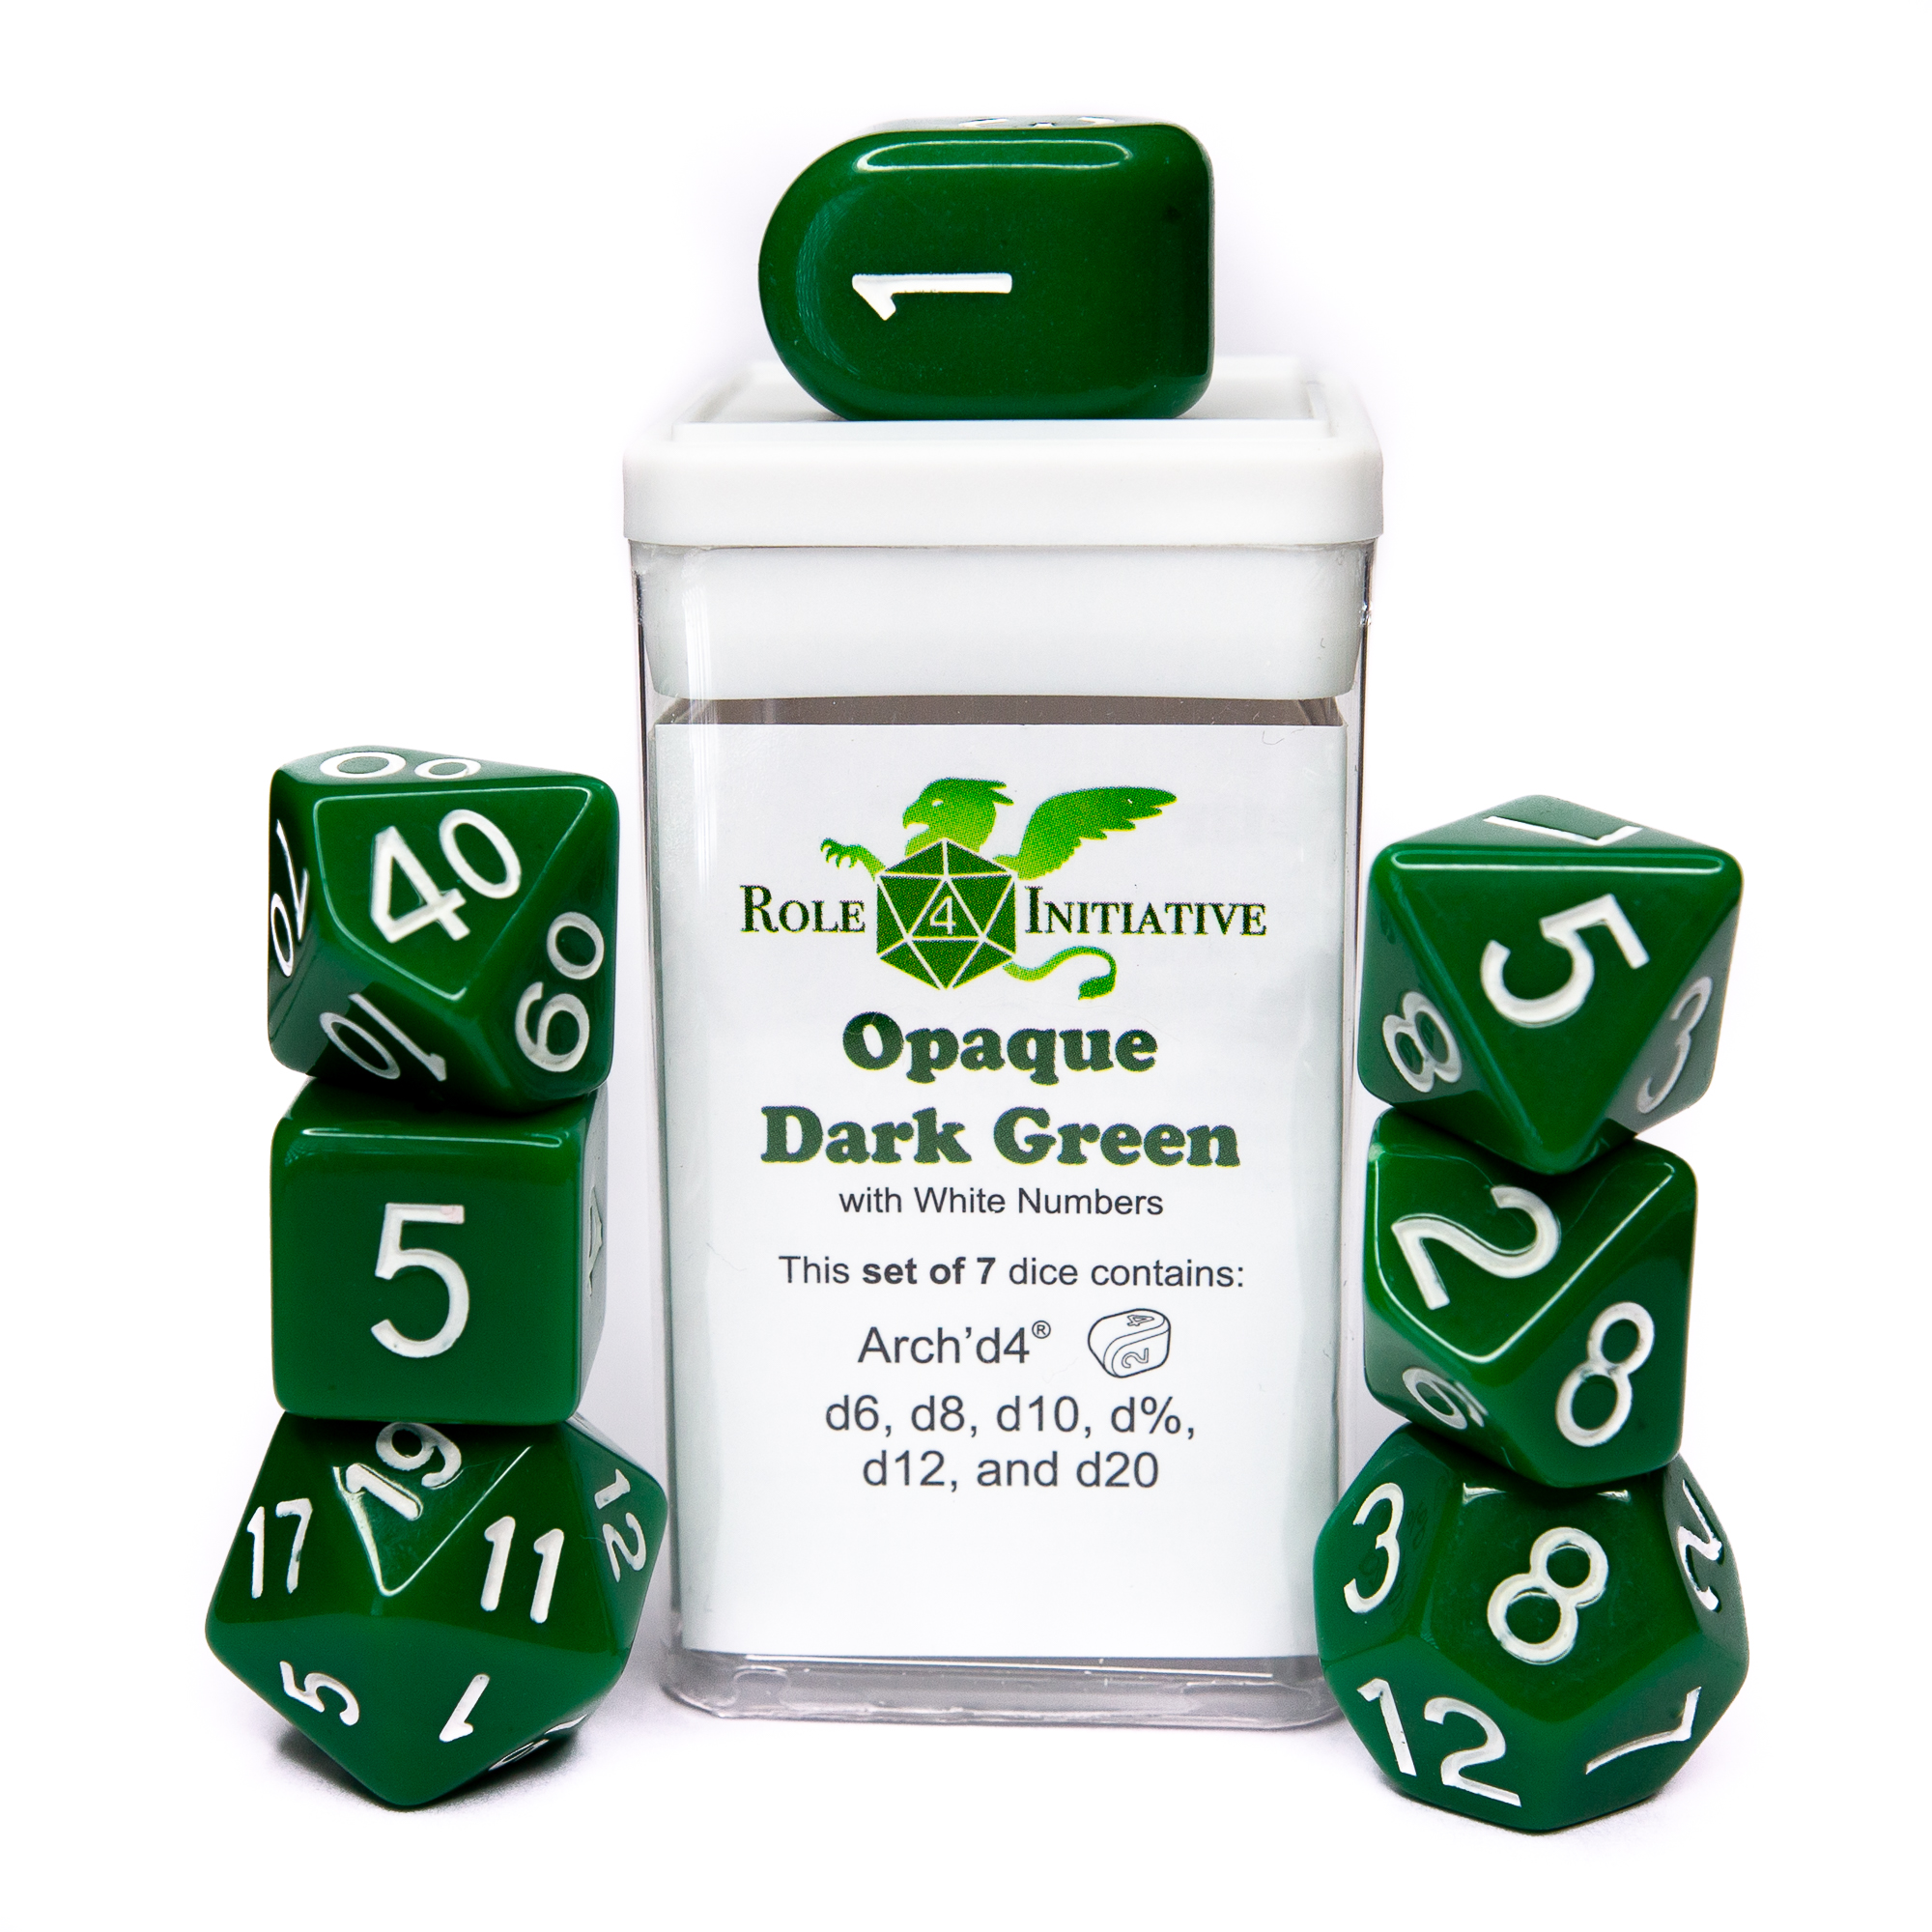 Role 4 Initiative: Polyhedral 7 Dice Set: Opaque Dark Green with White (Arch D4) 